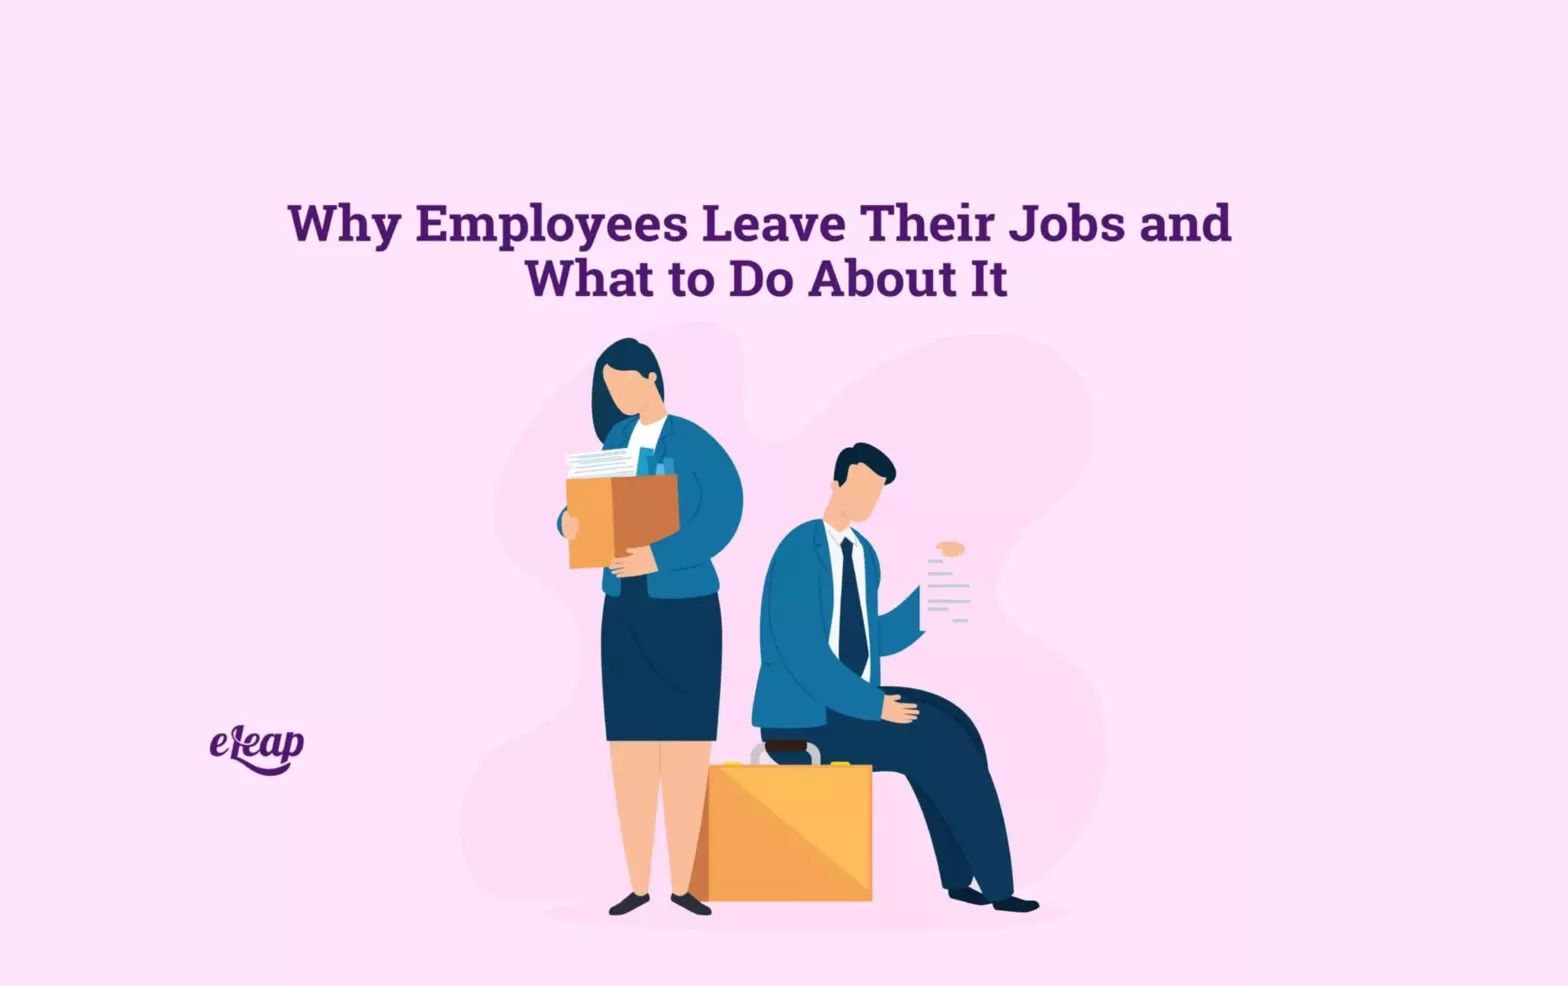 Why Employees Leave Their Jobs and What to Do About It